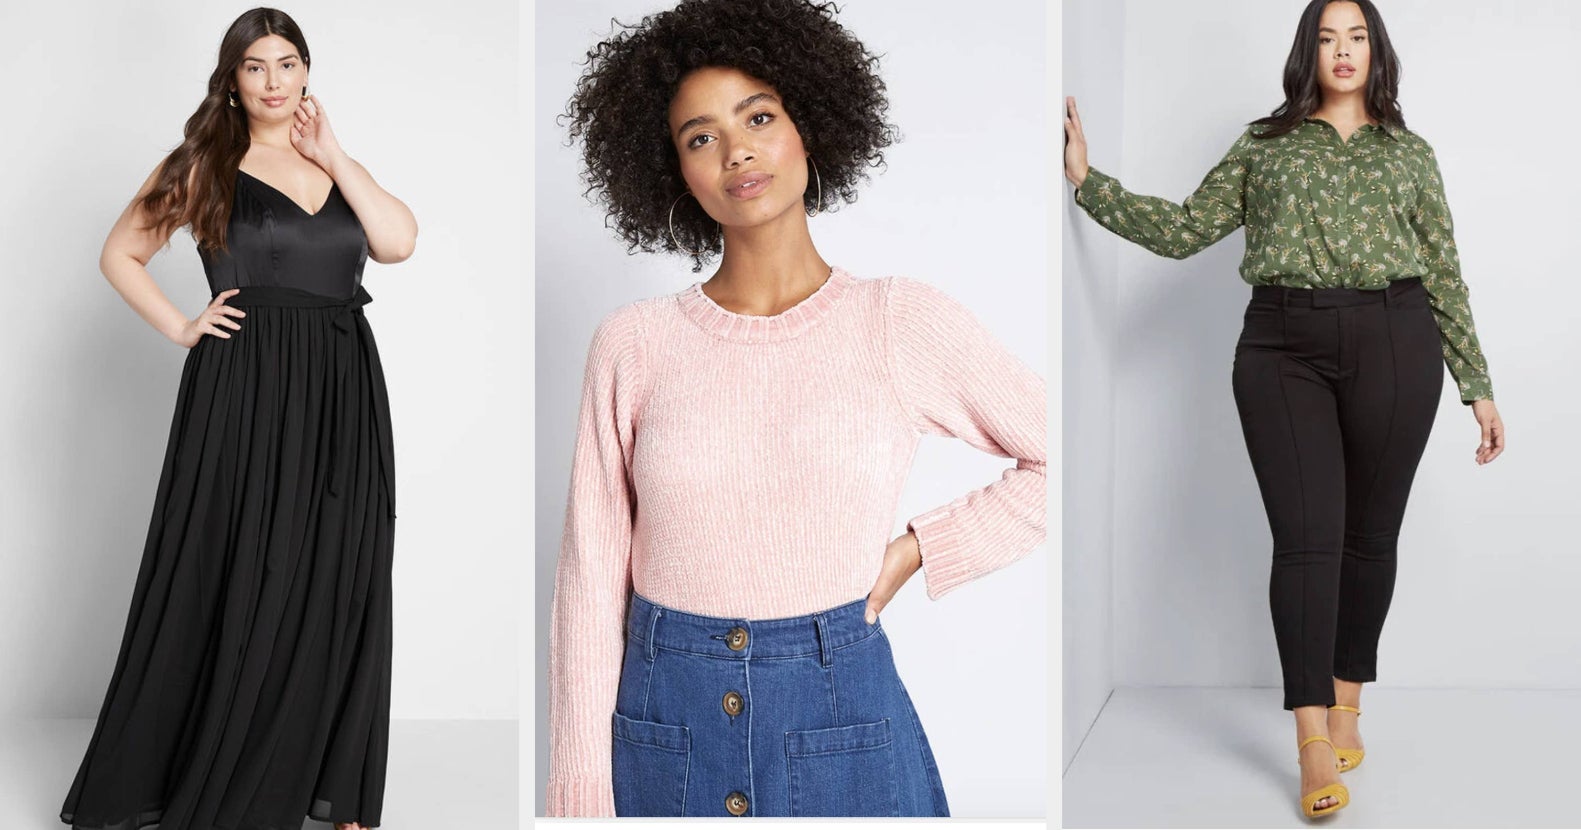 ModCloth Just Launched A Warehouse Sale With Discounts So Low You Might ...